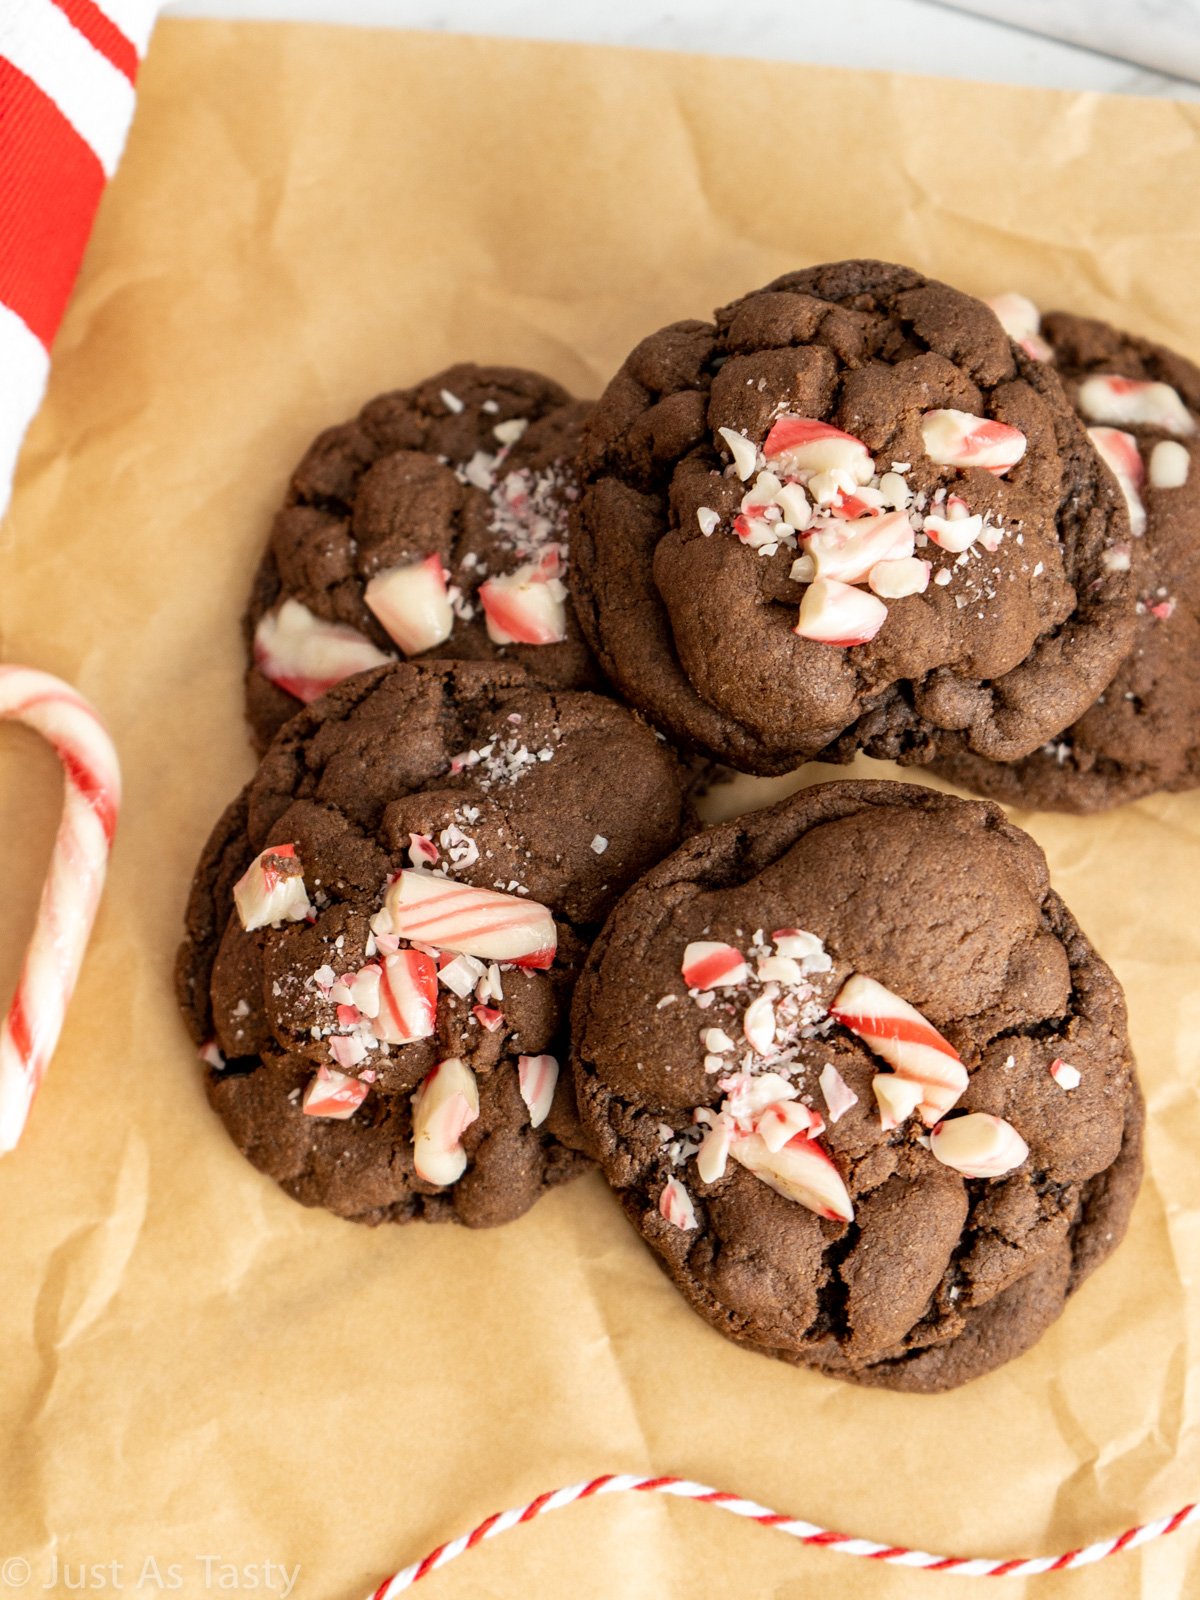 Chocolate cookies topped with crushed candy canes on brown parchment paper.